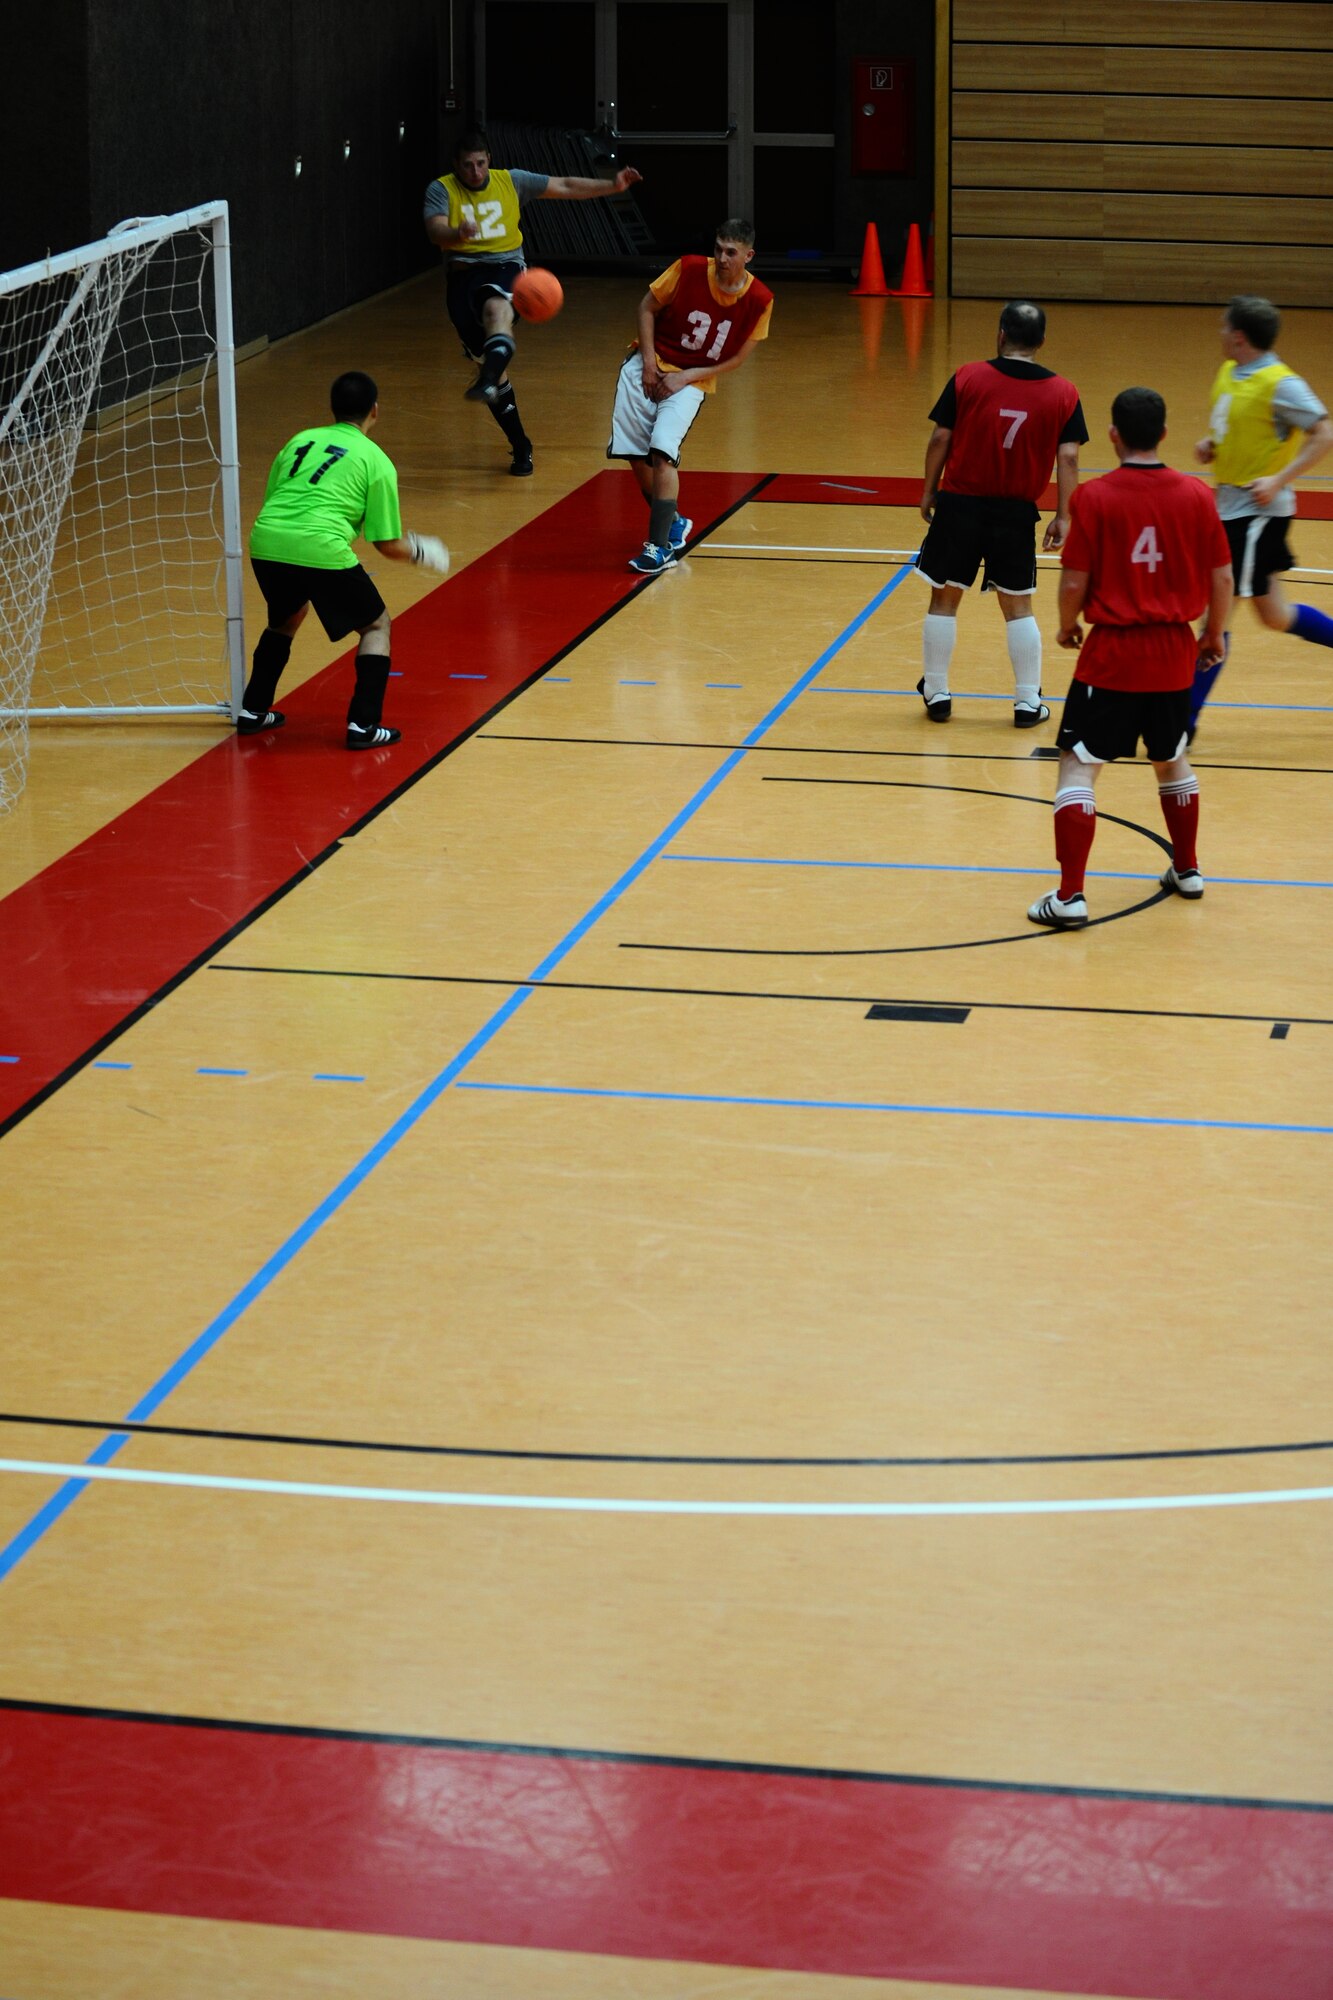 SPANGDAHLEM AIR BASE, Germany – Jarett Biggers, 81st Fighter Squadron, shoots the soccer ball during the indoor soccer championship at the Skelton Memorial Fitness Center here June 12. The 52nd Force Support Squadron defeated the 81st FS in the first game 7-6. The 81st FS won the double-elimination championship after winning the second game 9-5. (U.S. Air Force photo by Airman 1st Class Matthew B. Fredericks/Released)